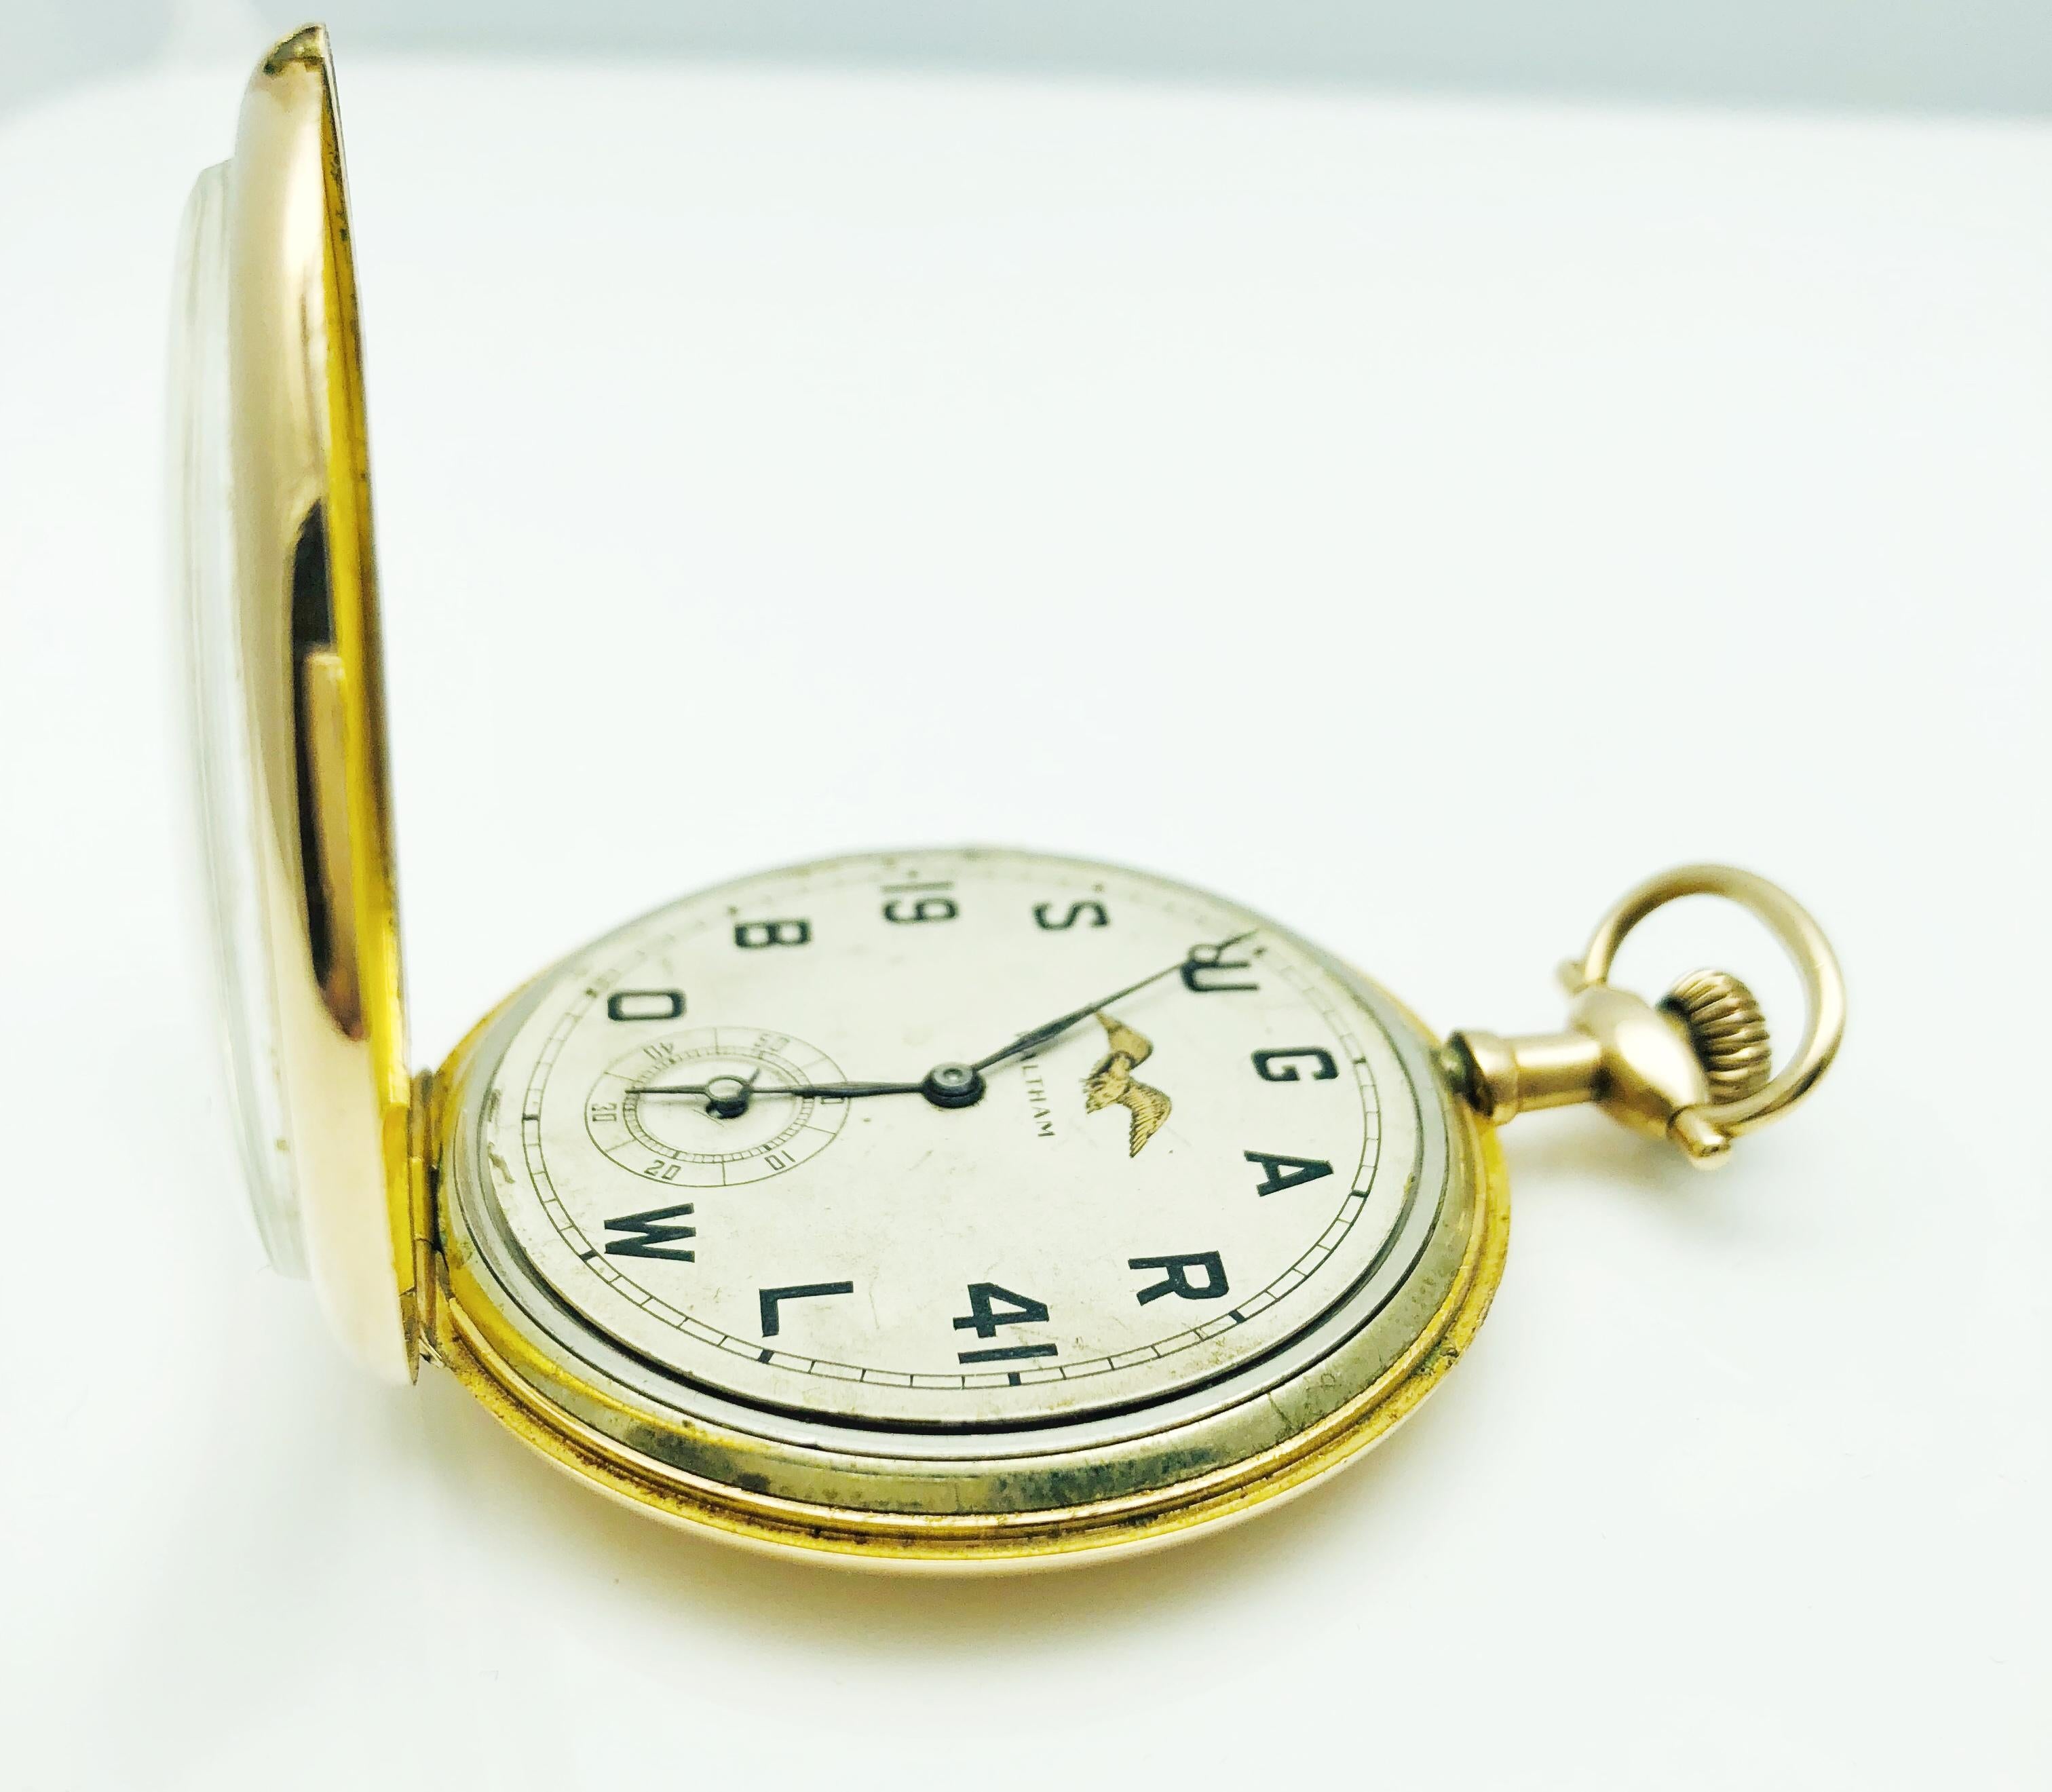 This is a Rare Piece of history! This Waltham 1941 Sugar Bowl Presentation Watch contains a 17 Jewel Manual Wind Movement. The 1941 Sugar Bowl was won by Boston College, defeating The University of Tennessee by a score of 19 to 13. Serial # 4693418